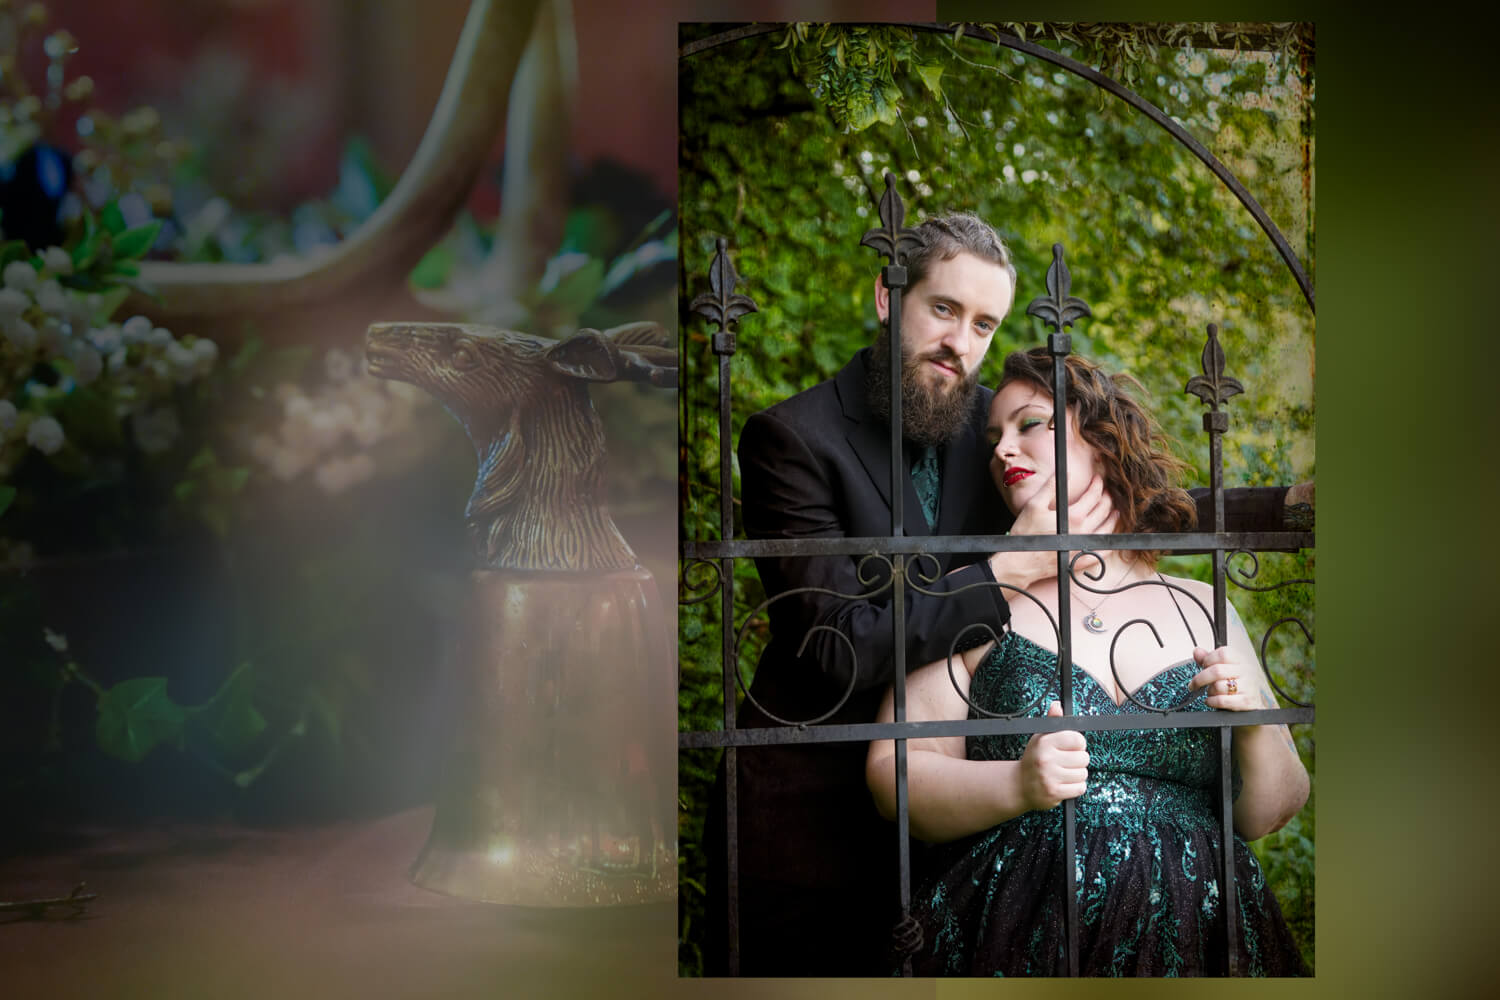 Eccentric wedding couple dressed in black and sparkling green posing behind an iron gate in a forest overlaying an artistic background with chalice and antlers